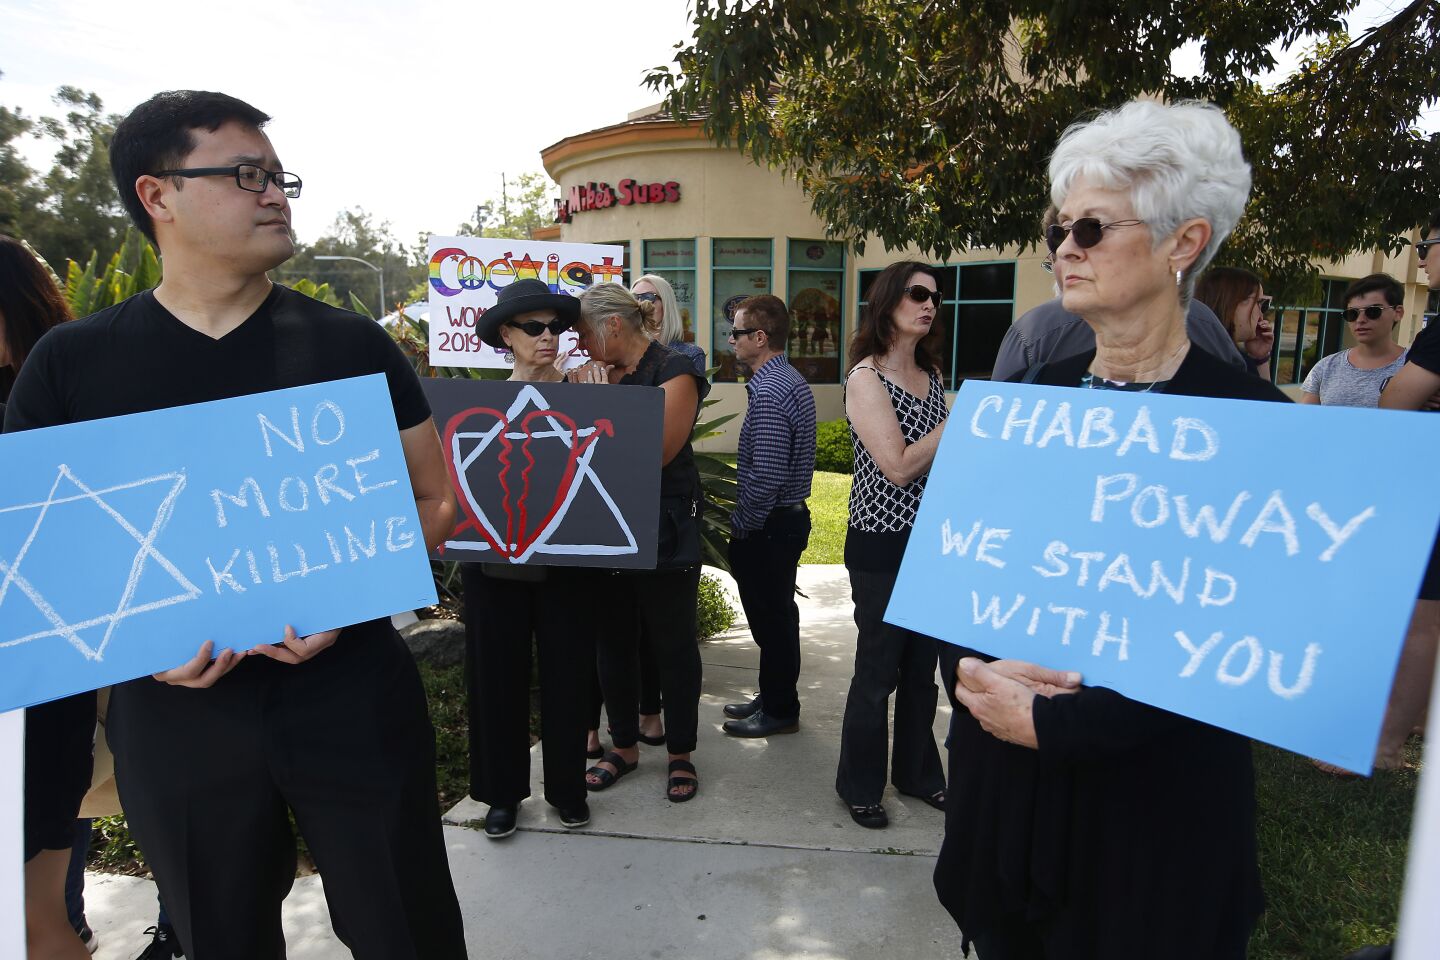 Mike Sakasegawa, left, of Mira Mesa and Penny Ribnik of Poway hold signs at a rally in support of the Jewish community not far from the Chabad of Poway, where a deadly shooting took place the day before on April 28, 2019 in Poway, California.